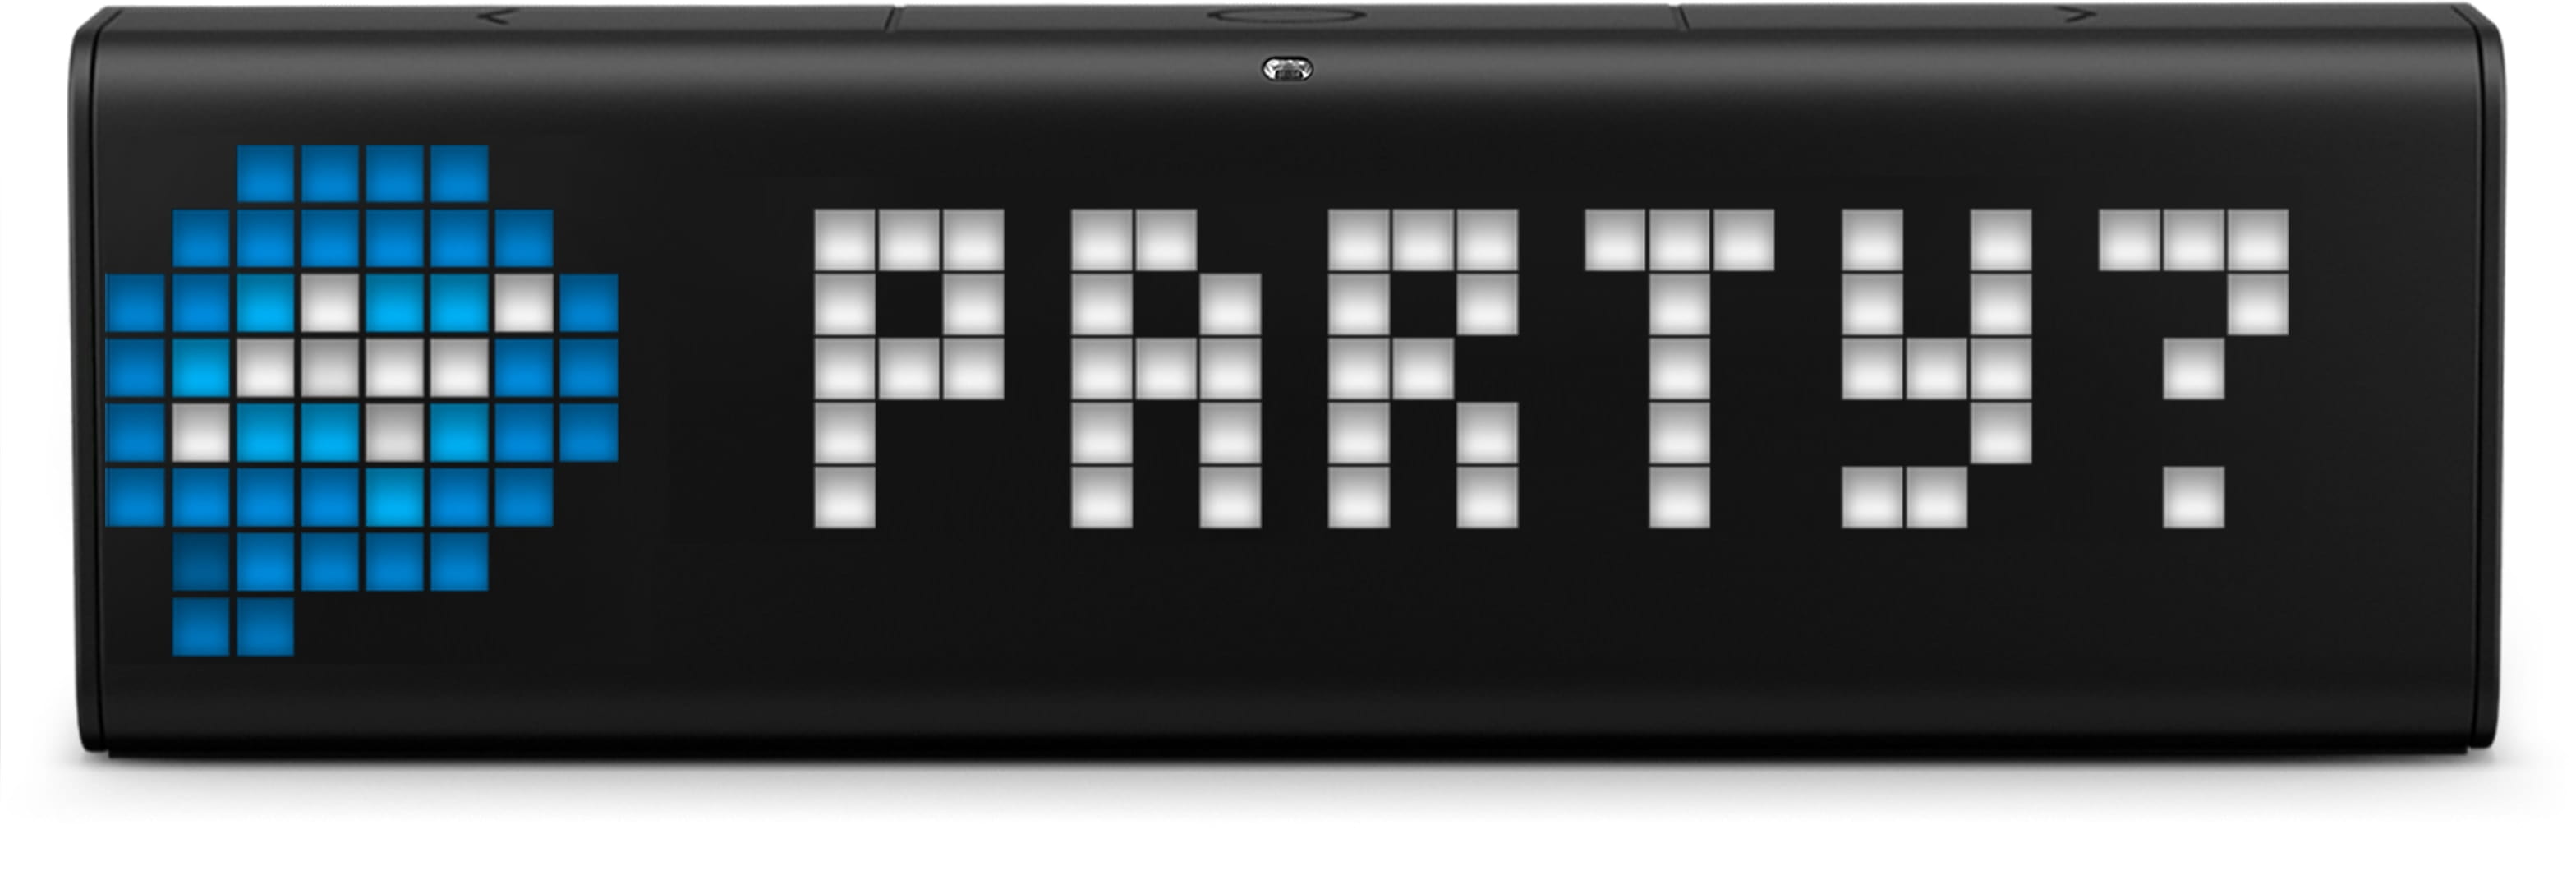 LaMetric Time smart clock displays the incoming Facebook message "party?"